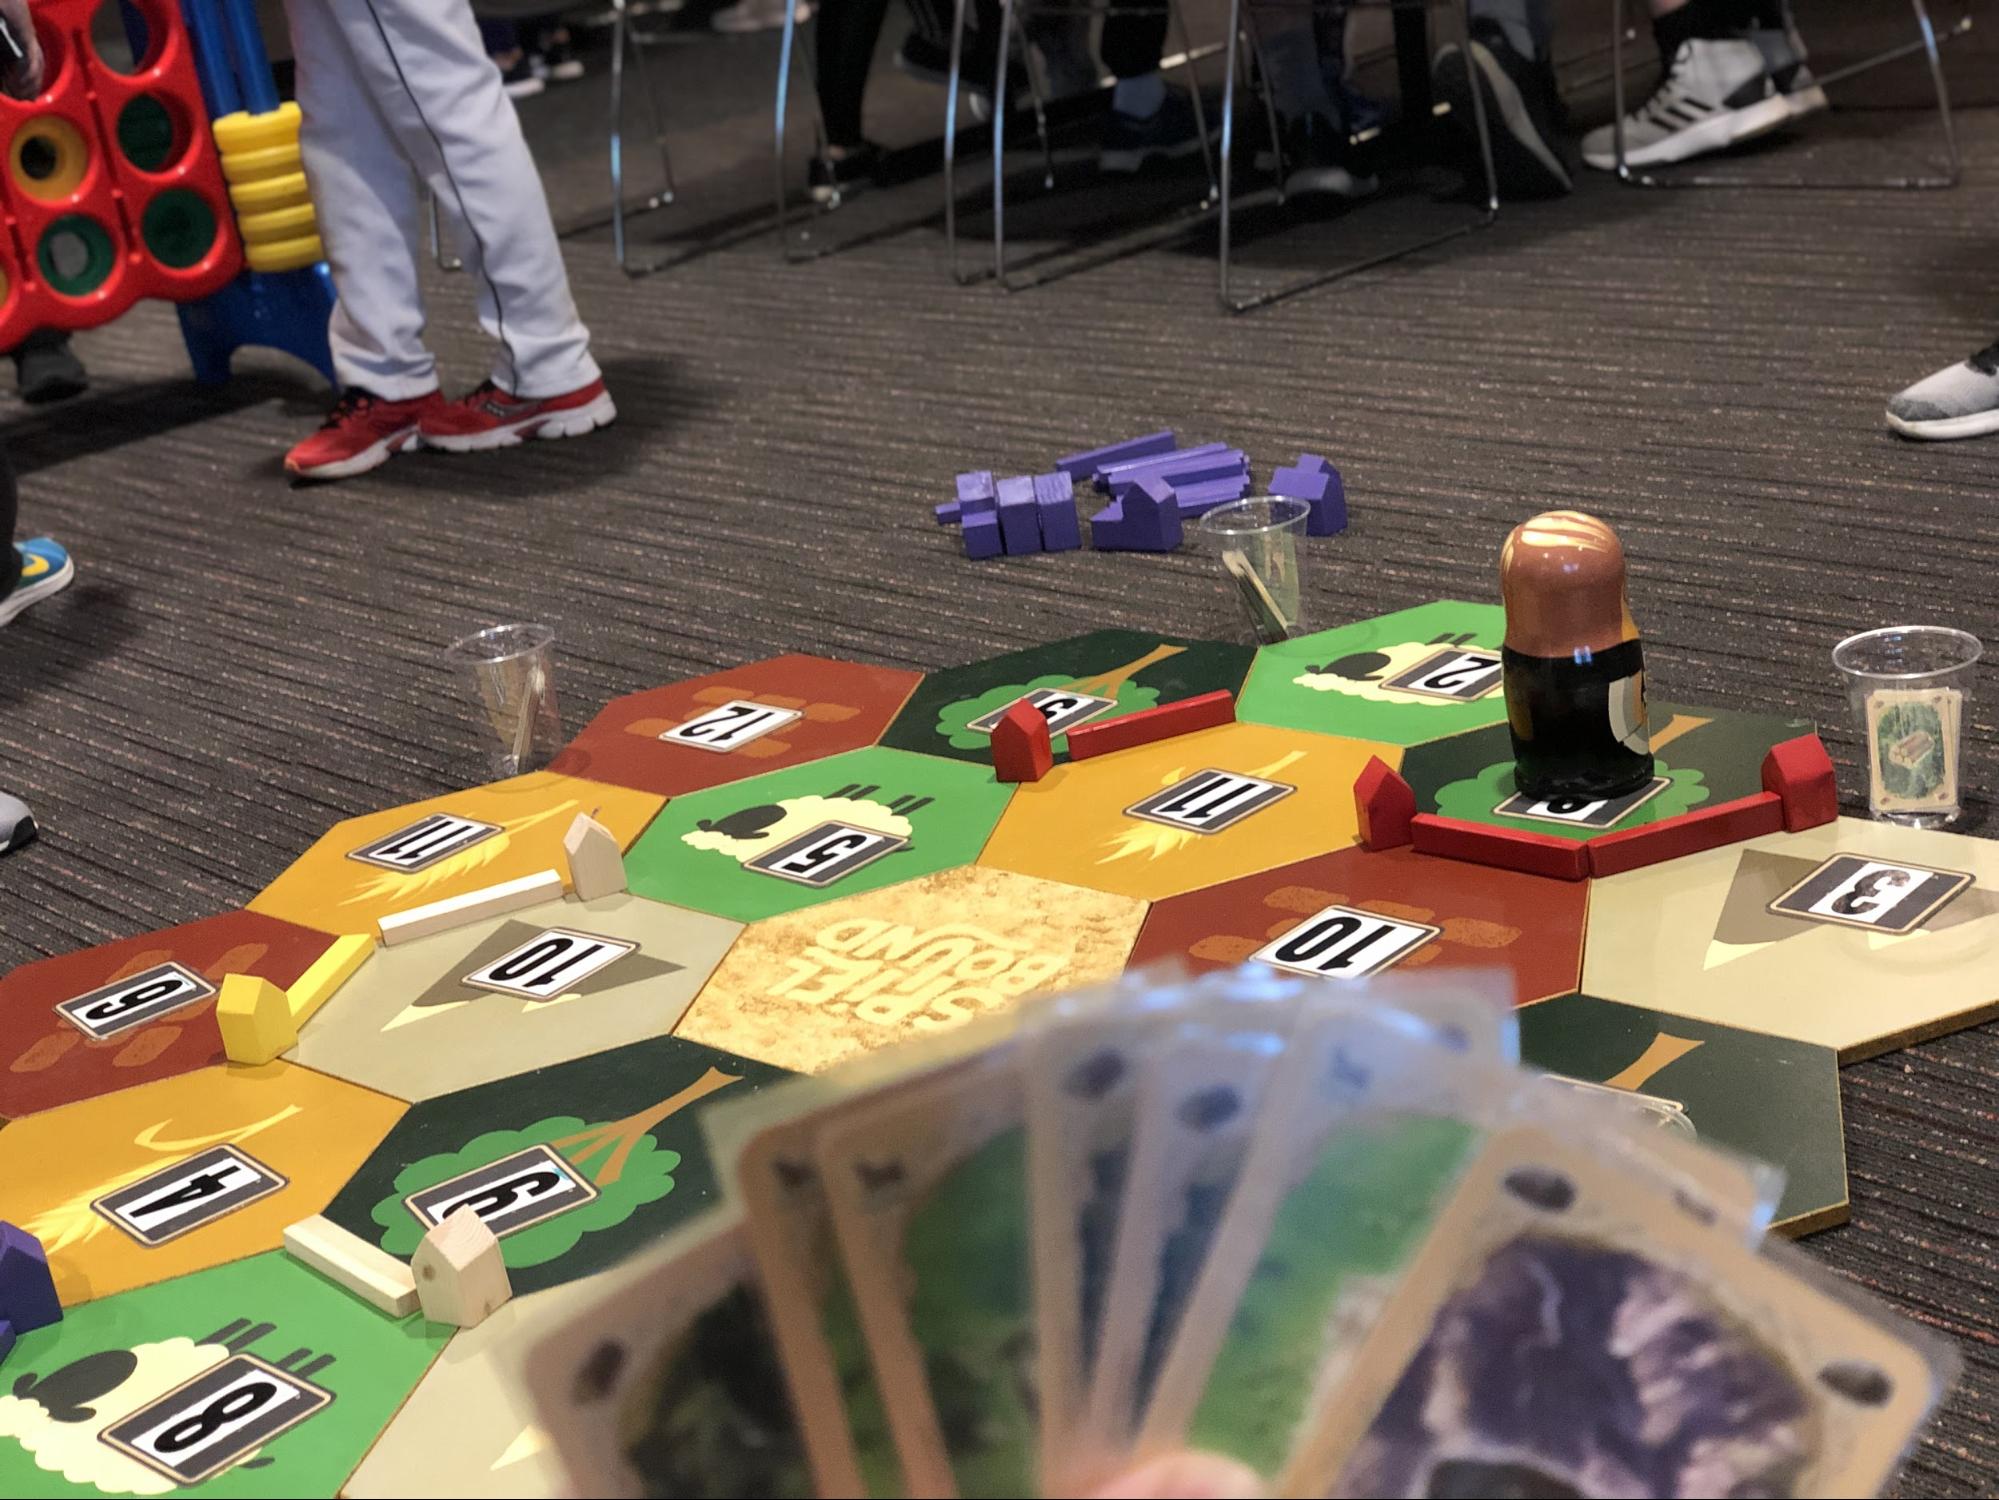 Giant Settlers of Catan at UNO’s “De-stress Fest” in April.